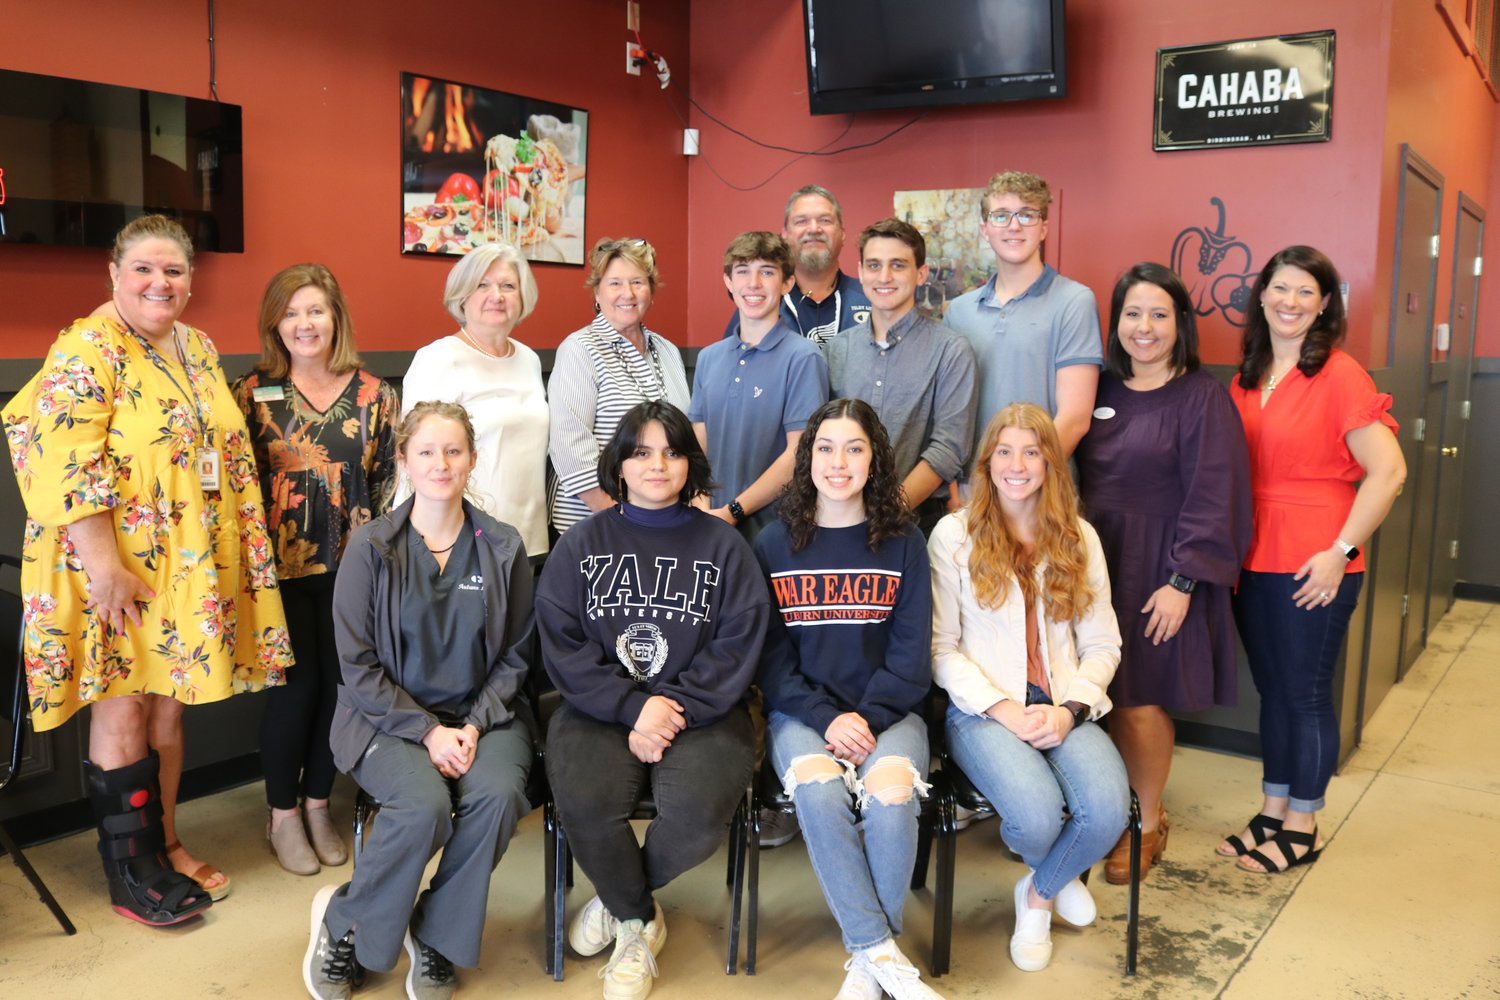 Pictured here, back row, from left: Wendy O'Toole, FHS Class of 2022 Counselor; Terry Burkle, Executive Director, Baldwin County Education Coalition; Lolly Holk, JaNay Dawson, Baldwin County Board of Education District 4; FHS student Ryder Burns; FHS Principal Russ Moore; FHS student Dylan Spivey, FHS student Jack McCoy, Kylee Raulerson, Executive Director, South Baldwin Chamber Foundation; and Carla Holk. Front row, from left: FHS student Autumn Lowery; FHS student Stephanie Pineda; FHS student Ella Cleverdon; and FHS student Hannah Cole. Not pictured, FHS student Cooper Niebuhr.